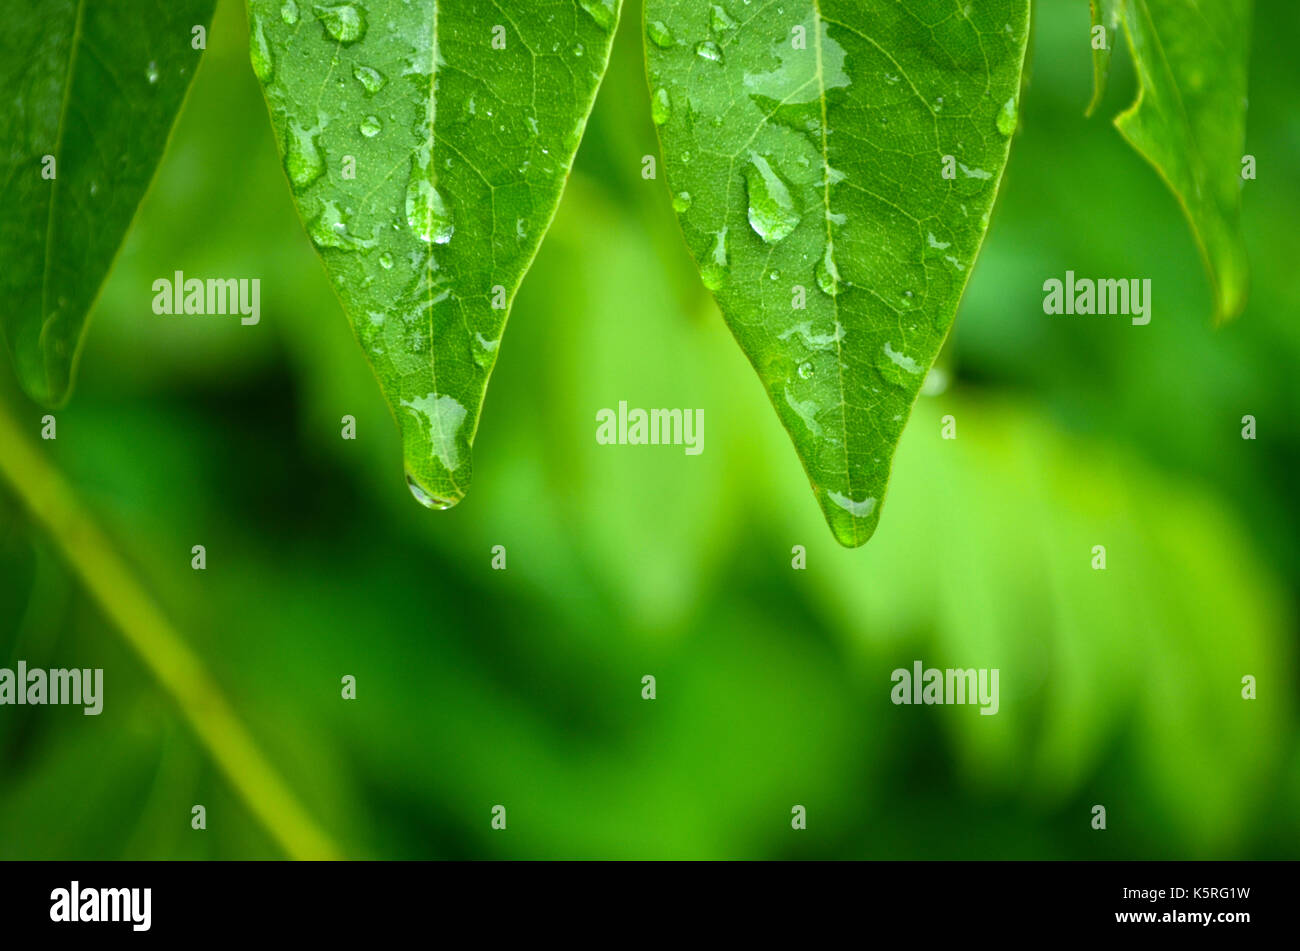 Water drops hanging from green leaves right after the rains against a vivid green background. Stock Photo